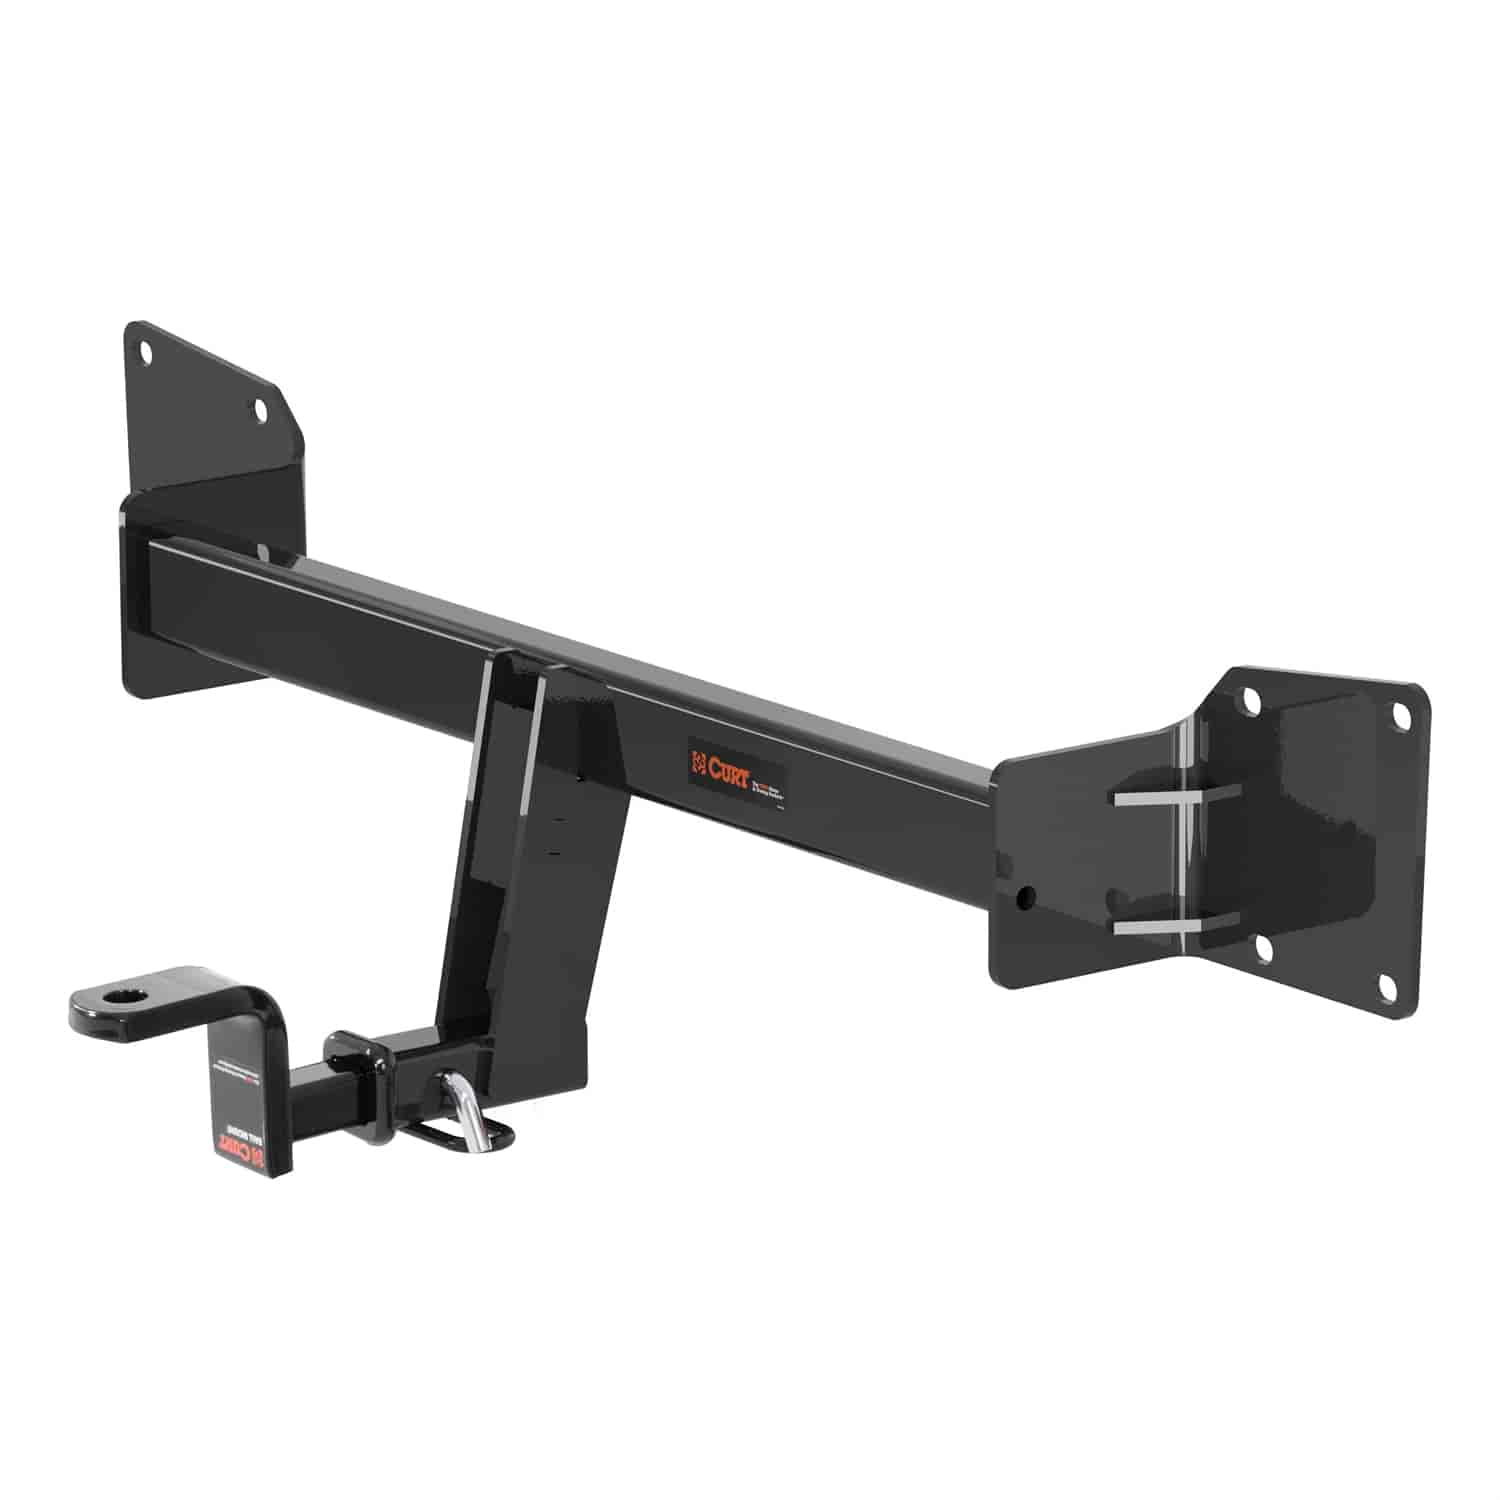 Class 2 Trailer Hitch with Ball Mount